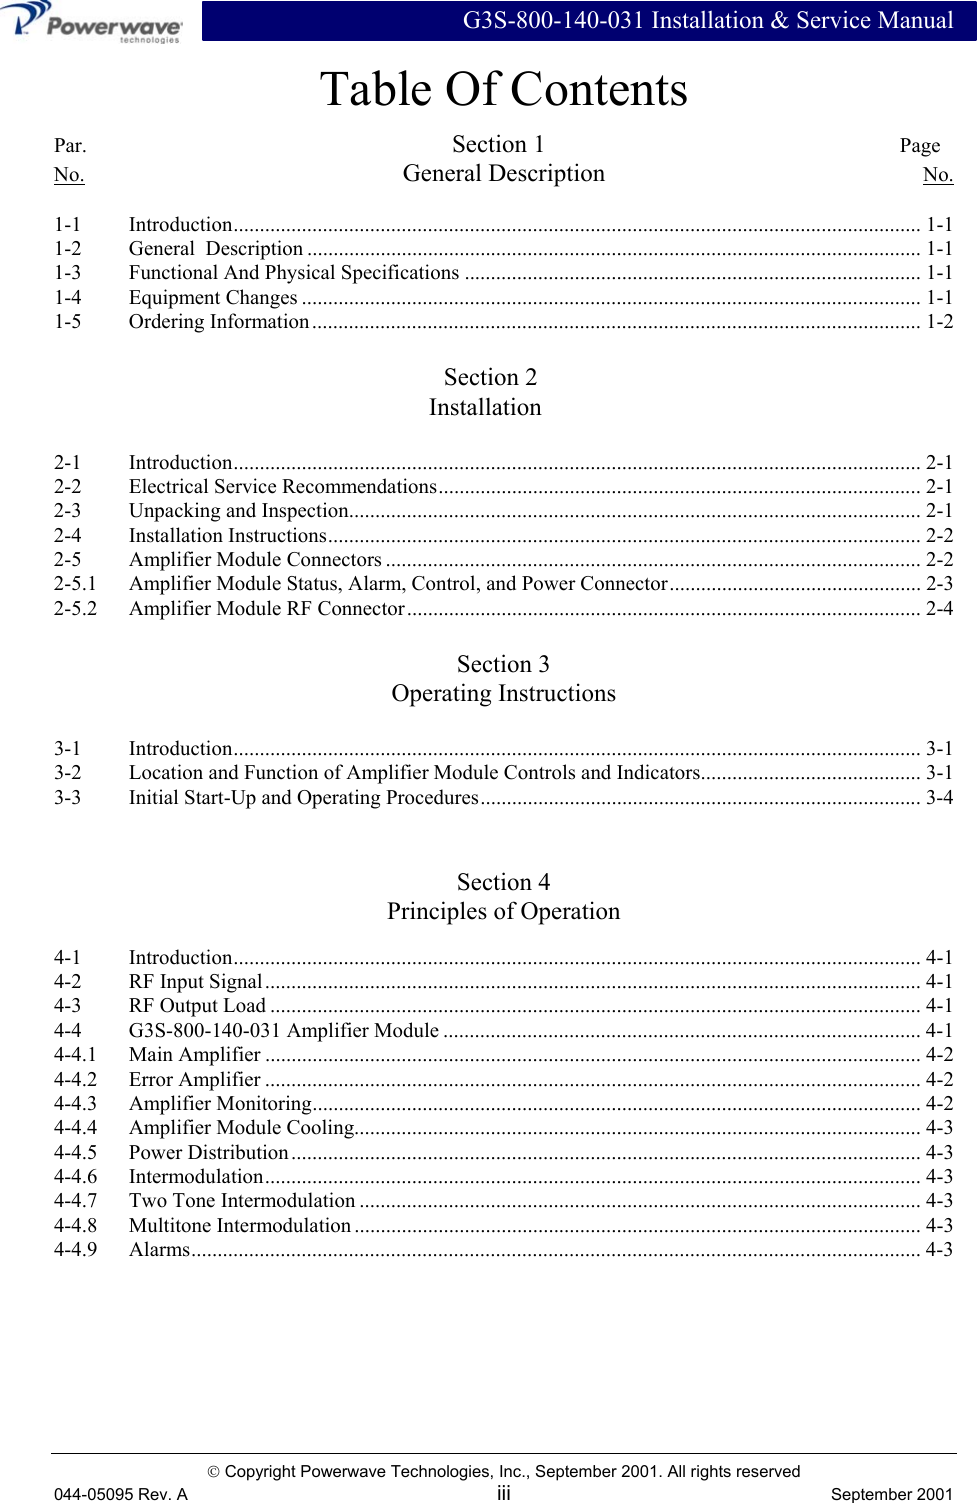  G3S-800-140-031 Installation &amp; Service Manual  Copyright Powerwave Technologies, Inc., September 2001. All rights reserved 044-05095 Rev. A iii  September 2001 Table Of Contents Par.         Section 1         Page No. General Description No.  1-1 Introduction................................................................................................................................... 1-1 1-2  General  Description ..................................................................................................................... 1-1 1-3  Functional And Physical Specifications ....................................................................................... 1-1 1-4 Equipment Changes ...................................................................................................................... 1-1 1-5 Ordering Information.................................................................................................................... 1-2        Section 2      Installation  2-1 Introduction................................................................................................................................... 2-1 2-2 Electrical Service Recommendations............................................................................................ 2-1 2-3   Unpacking and Inspection............................................................................................................. 2-1 2-4 Installation Instructions................................................................................................................. 2-2 2-5  Amplifier Module Connectors ...................................................................................................... 2-2 2-5.1  Amplifier Module Status, Alarm, Control, and Power Connector................................................ 2-3 2-5.2  Amplifier Module RF Connector.................................................................................................. 2-4  Section 3 Operating Instructions  3-1 Introduction................................................................................................................................... 3-1 3-2  Location and Function of Amplifier Module Controls and Indicators.......................................... 3-1 3-3  Initial Start-Up and Operating Procedures.................................................................................... 3-4   Section 4 Principles of Operation  4-1 Introduction................................................................................................................................... 4-1 4-2  RF Input Signal............................................................................................................................. 4-1 4-3  RF Output Load ............................................................................................................................ 4-1 4-4  G3S-800-140-031 Amplifier Module ........................................................................................... 4-1 4-4.1 Main Amplifier ............................................................................................................................. 4-2 4-4.2 Error Amplifier ............................................................................................................................. 4-2 4-4.3 Amplifier Monitoring.................................................................................................................... 4-2 4-4.4  Amplifier Module Cooling............................................................................................................ 4-3 4-4.5 Power Distribution........................................................................................................................ 4-3 4-4.6   Intermodulation............................................................................................................................. 4-3 4-4.7  Two Tone Intermodulation ........................................................................................................... 4-3 4-4.8 Multitone Intermodulation ............................................................................................................ 4-3 4-4.9 Alarms........................................................................................................................................... 4-3  